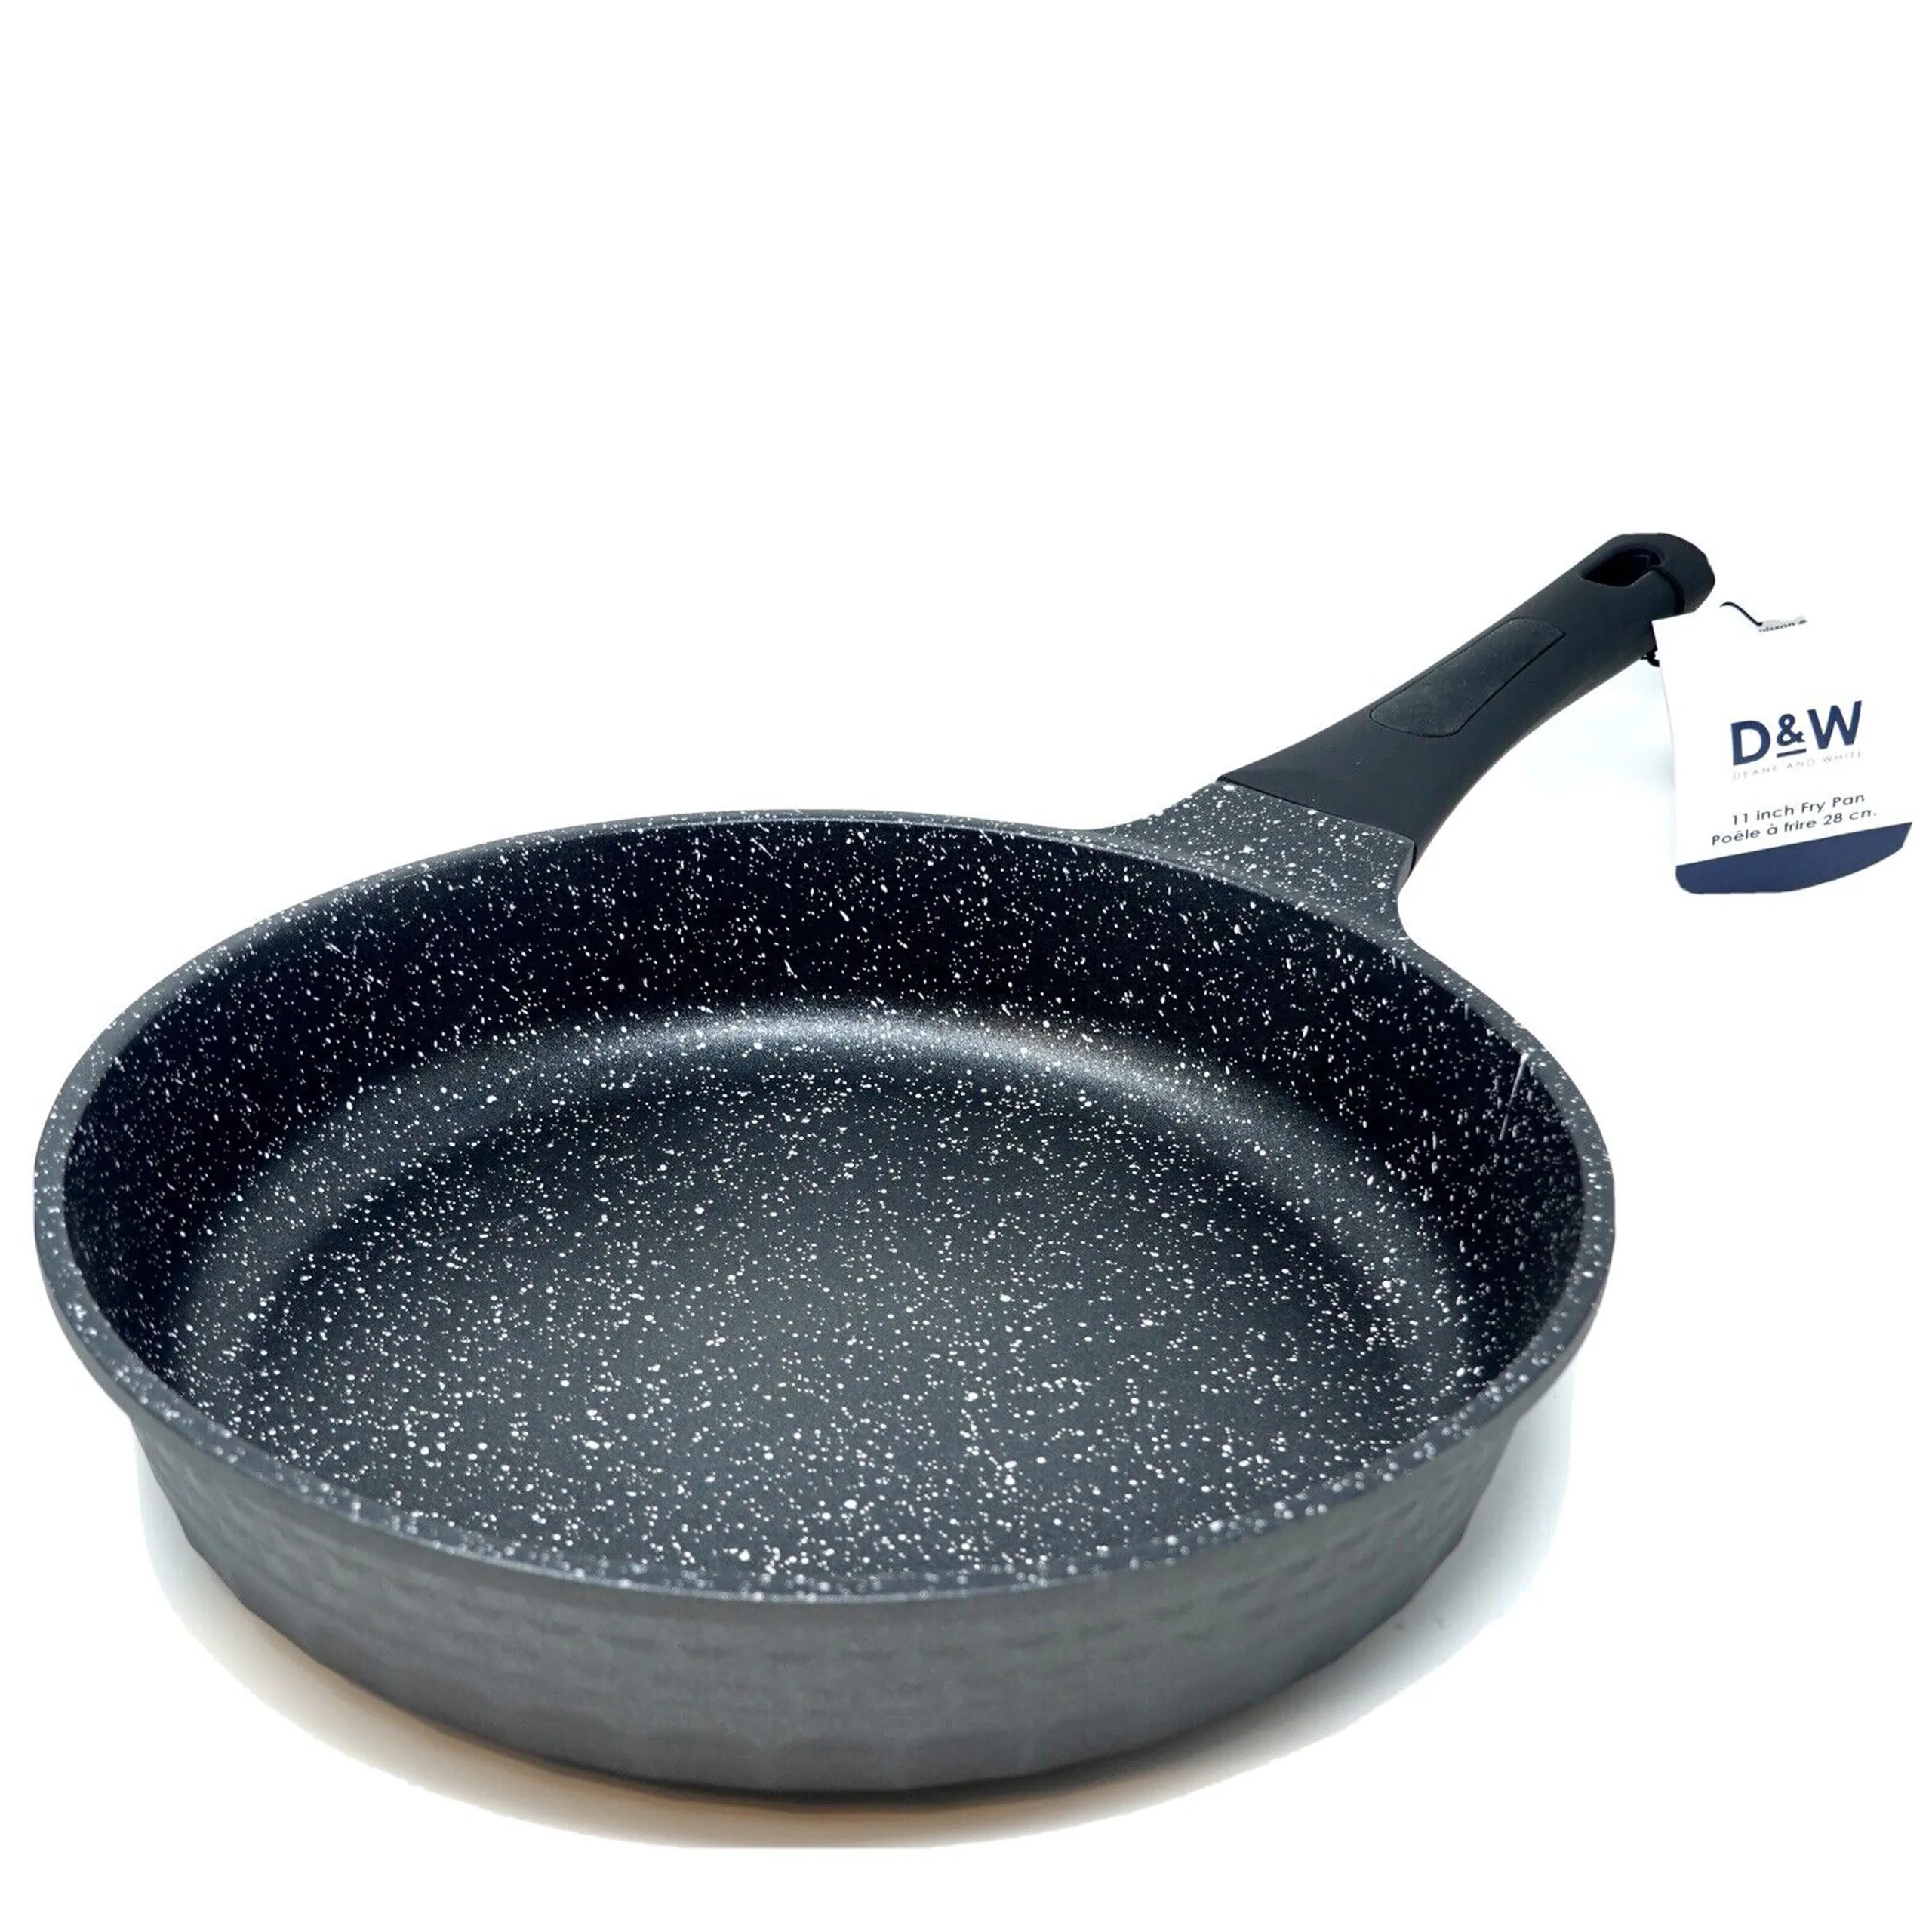 https://deaneandwhite.org/wp-content/uploads/Frying-pan-skillet-11-inches.jpg